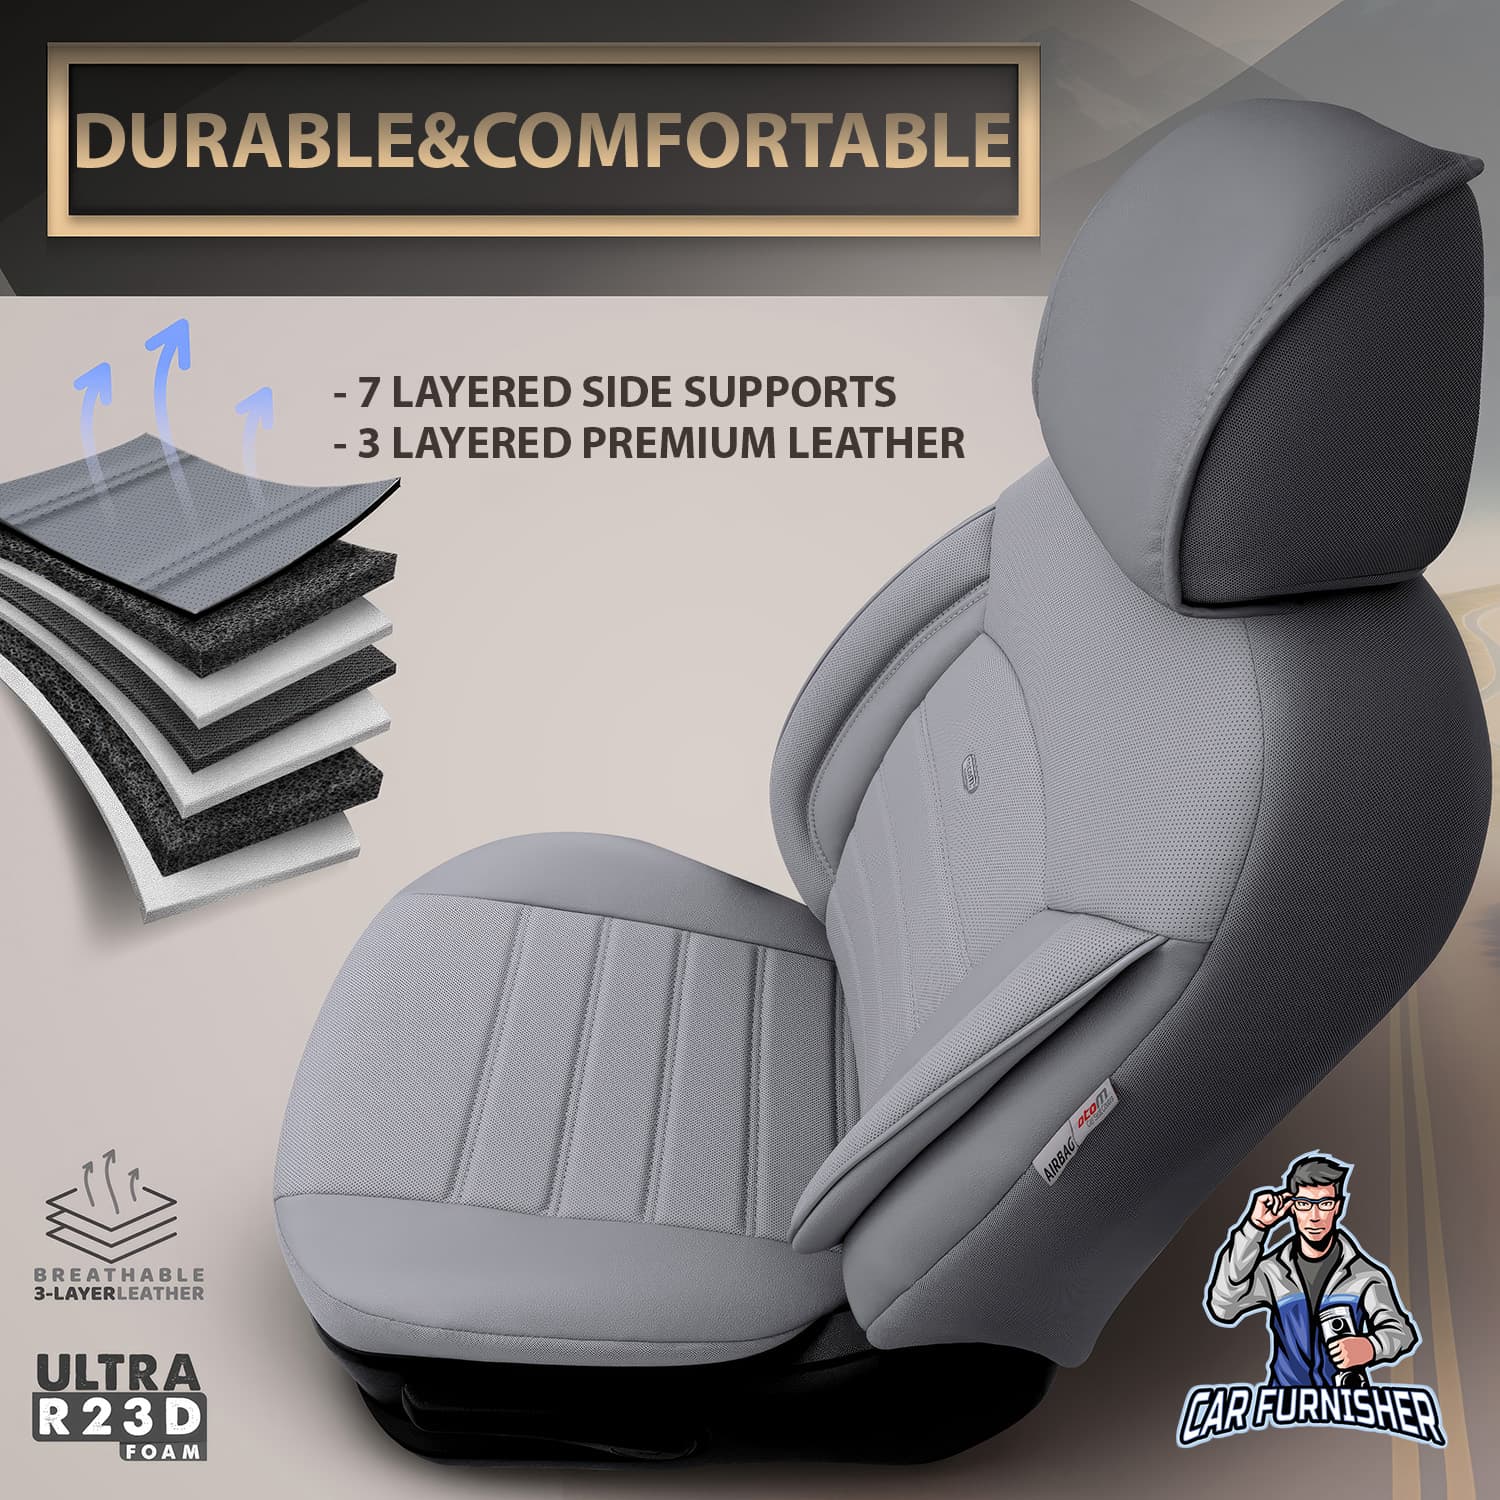 Mercedes 190 Seat Covers Inspire Design Gray 5 Seats + Headrests (Full Set) Full Leather